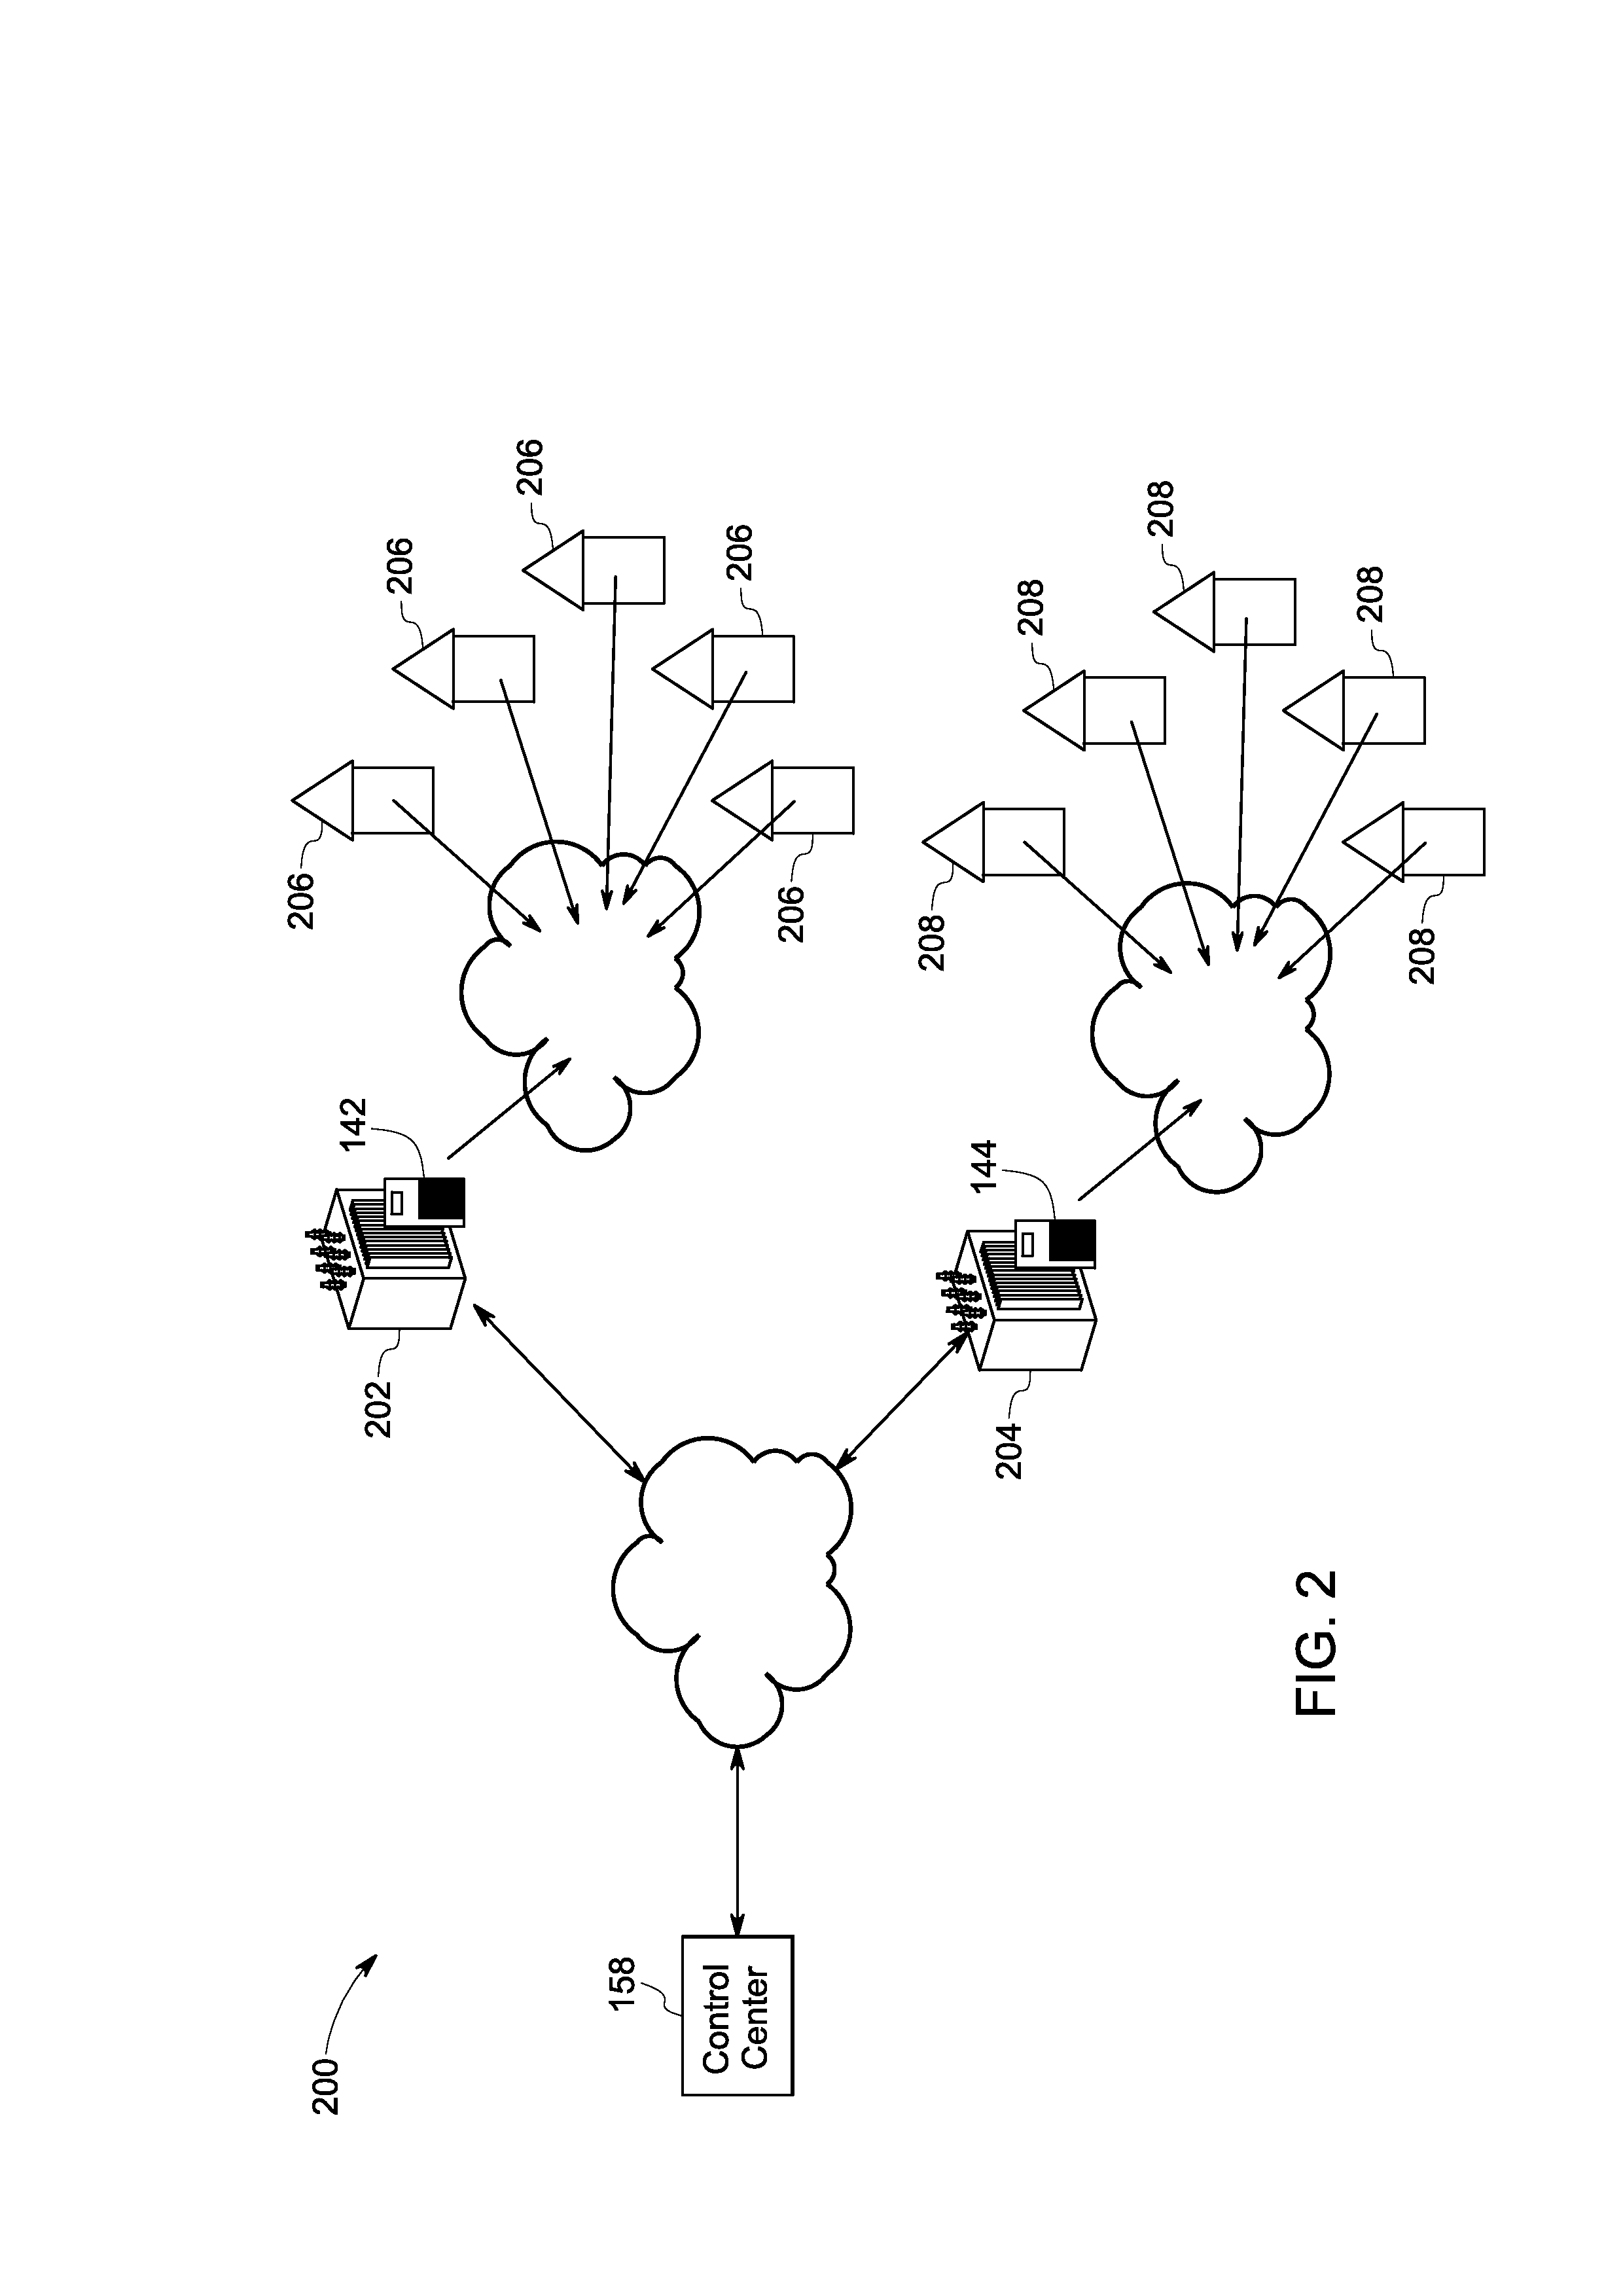 Systems and methods for controlling power systems